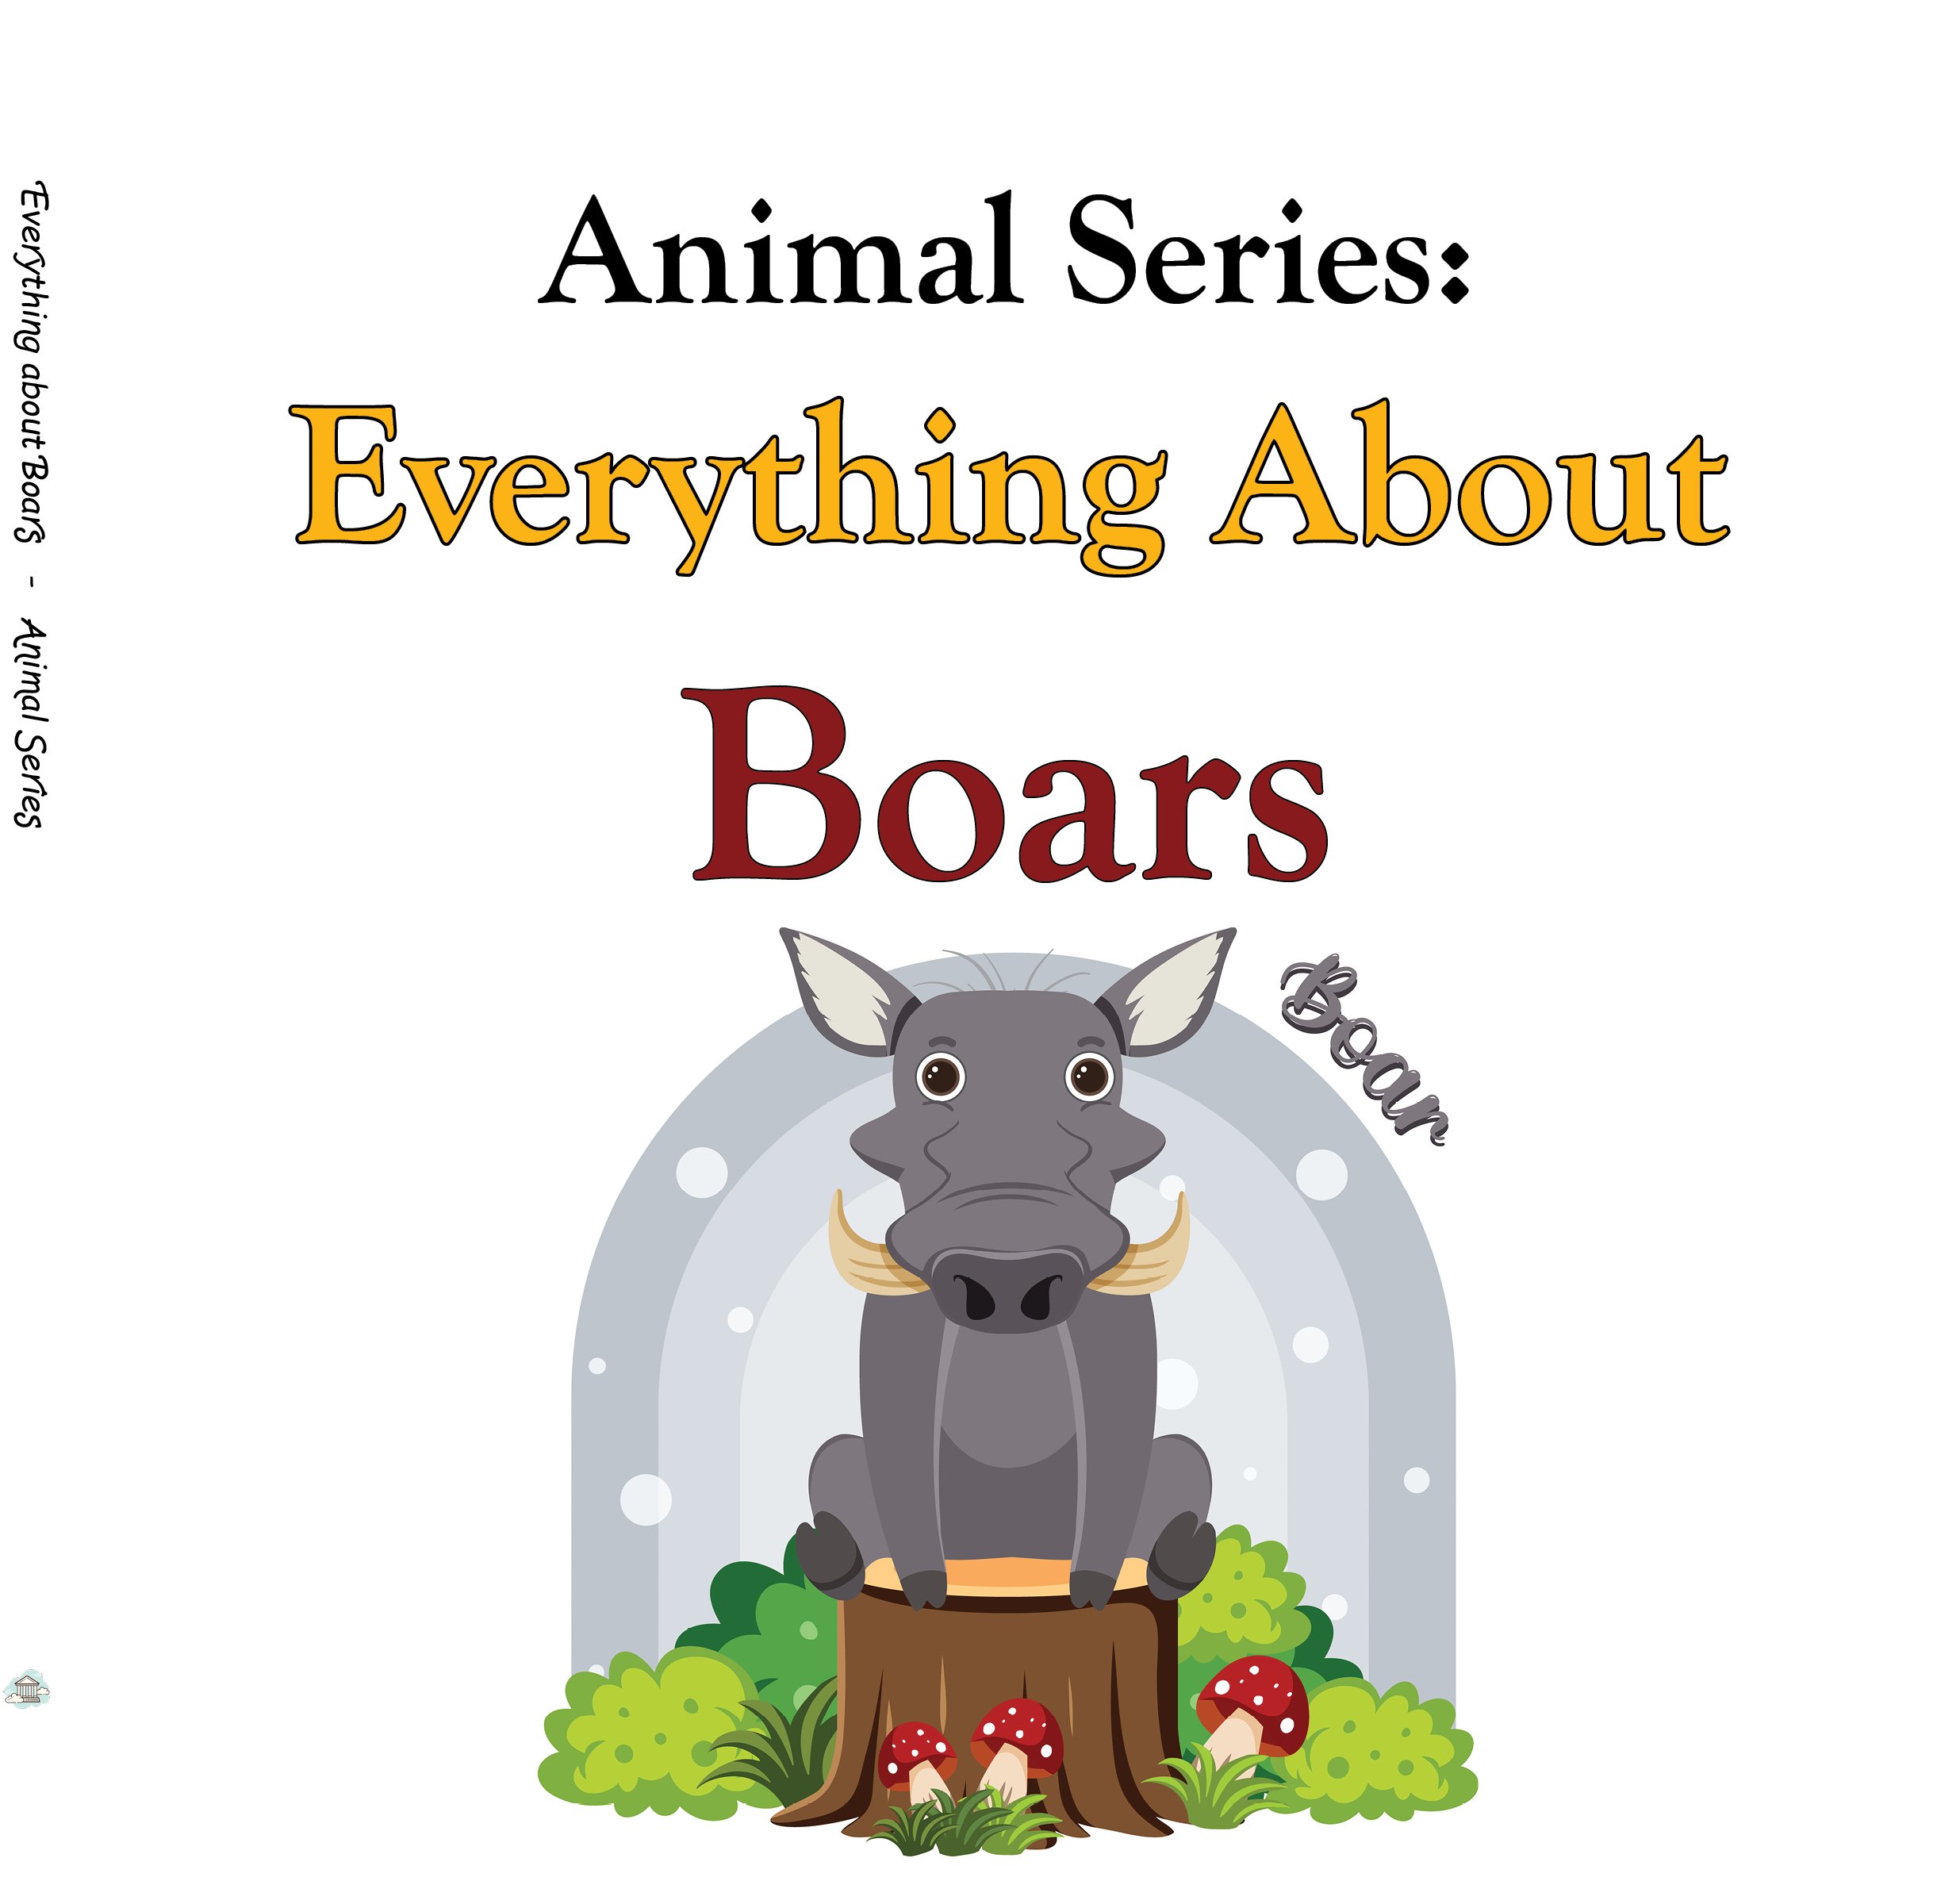 Everything about Boars - Animal Series.jpg